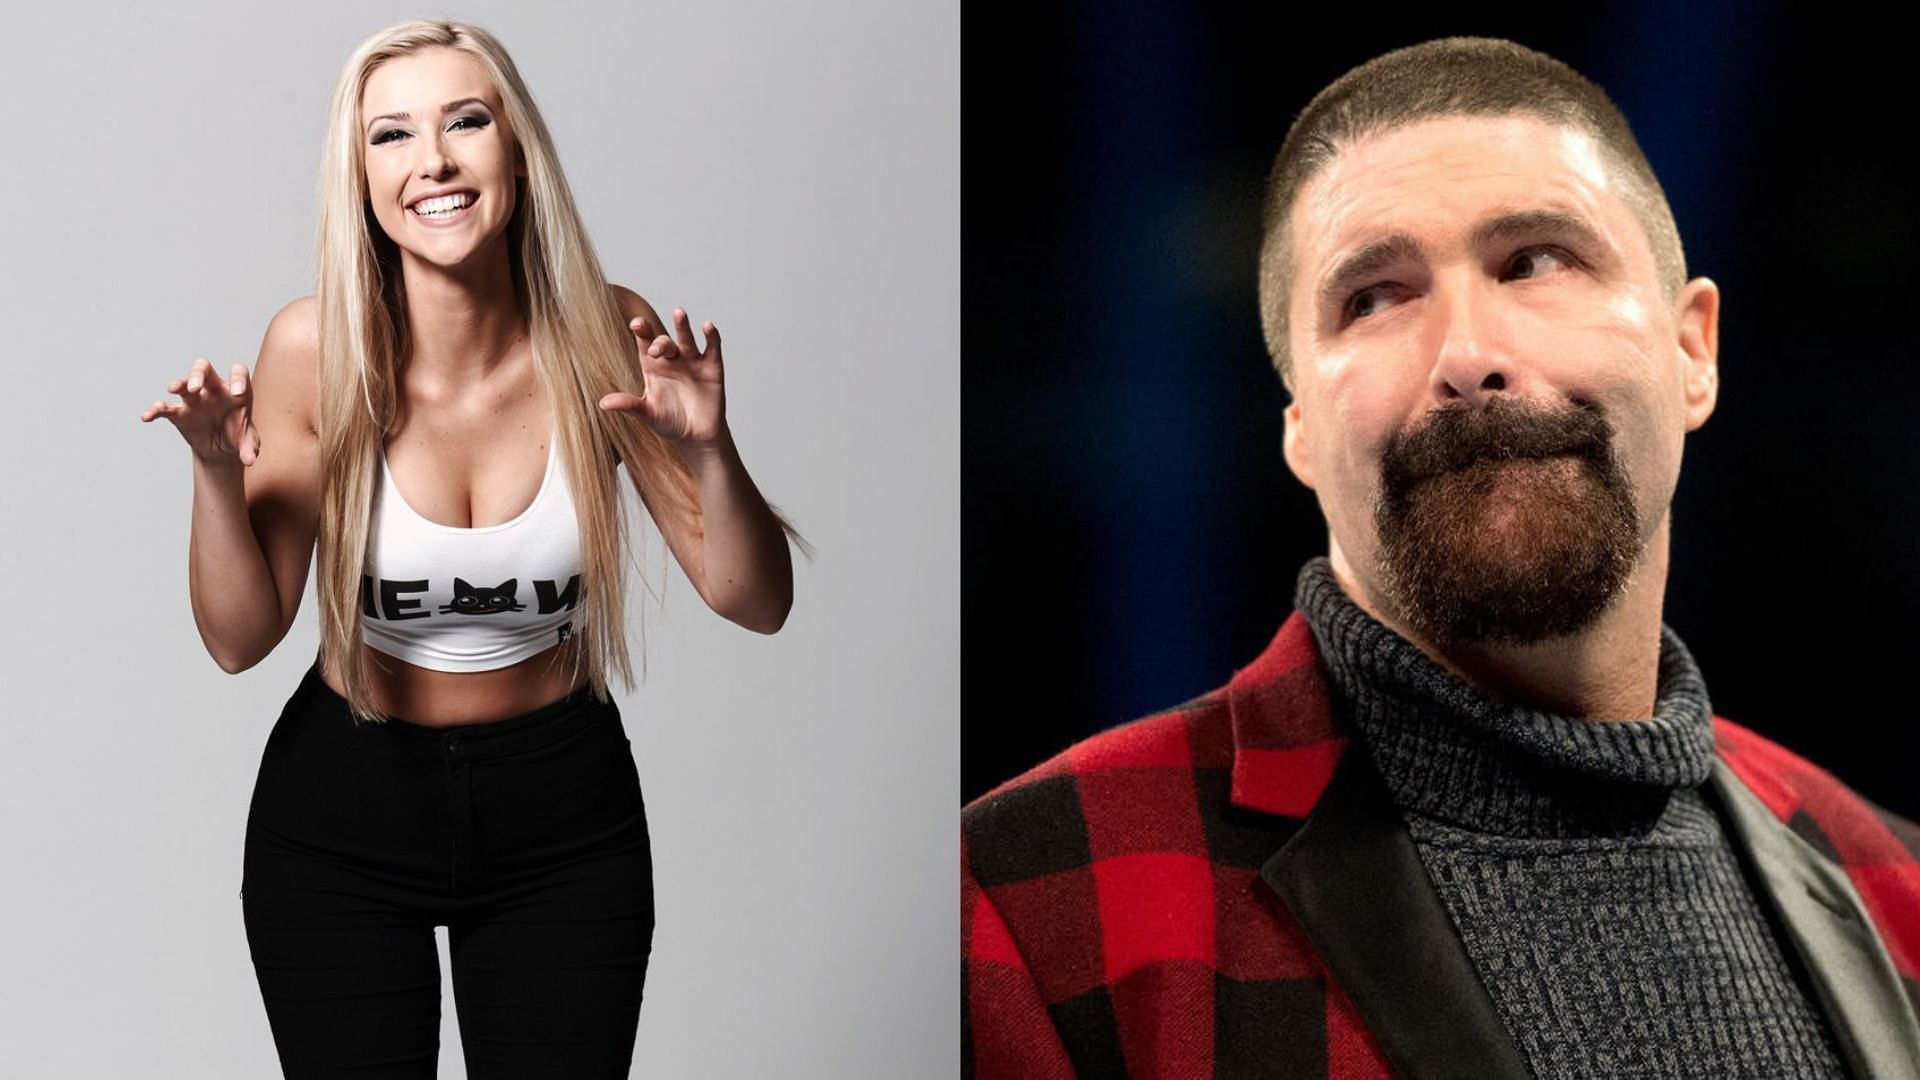 Noelle Foley and her father, Mick Foley